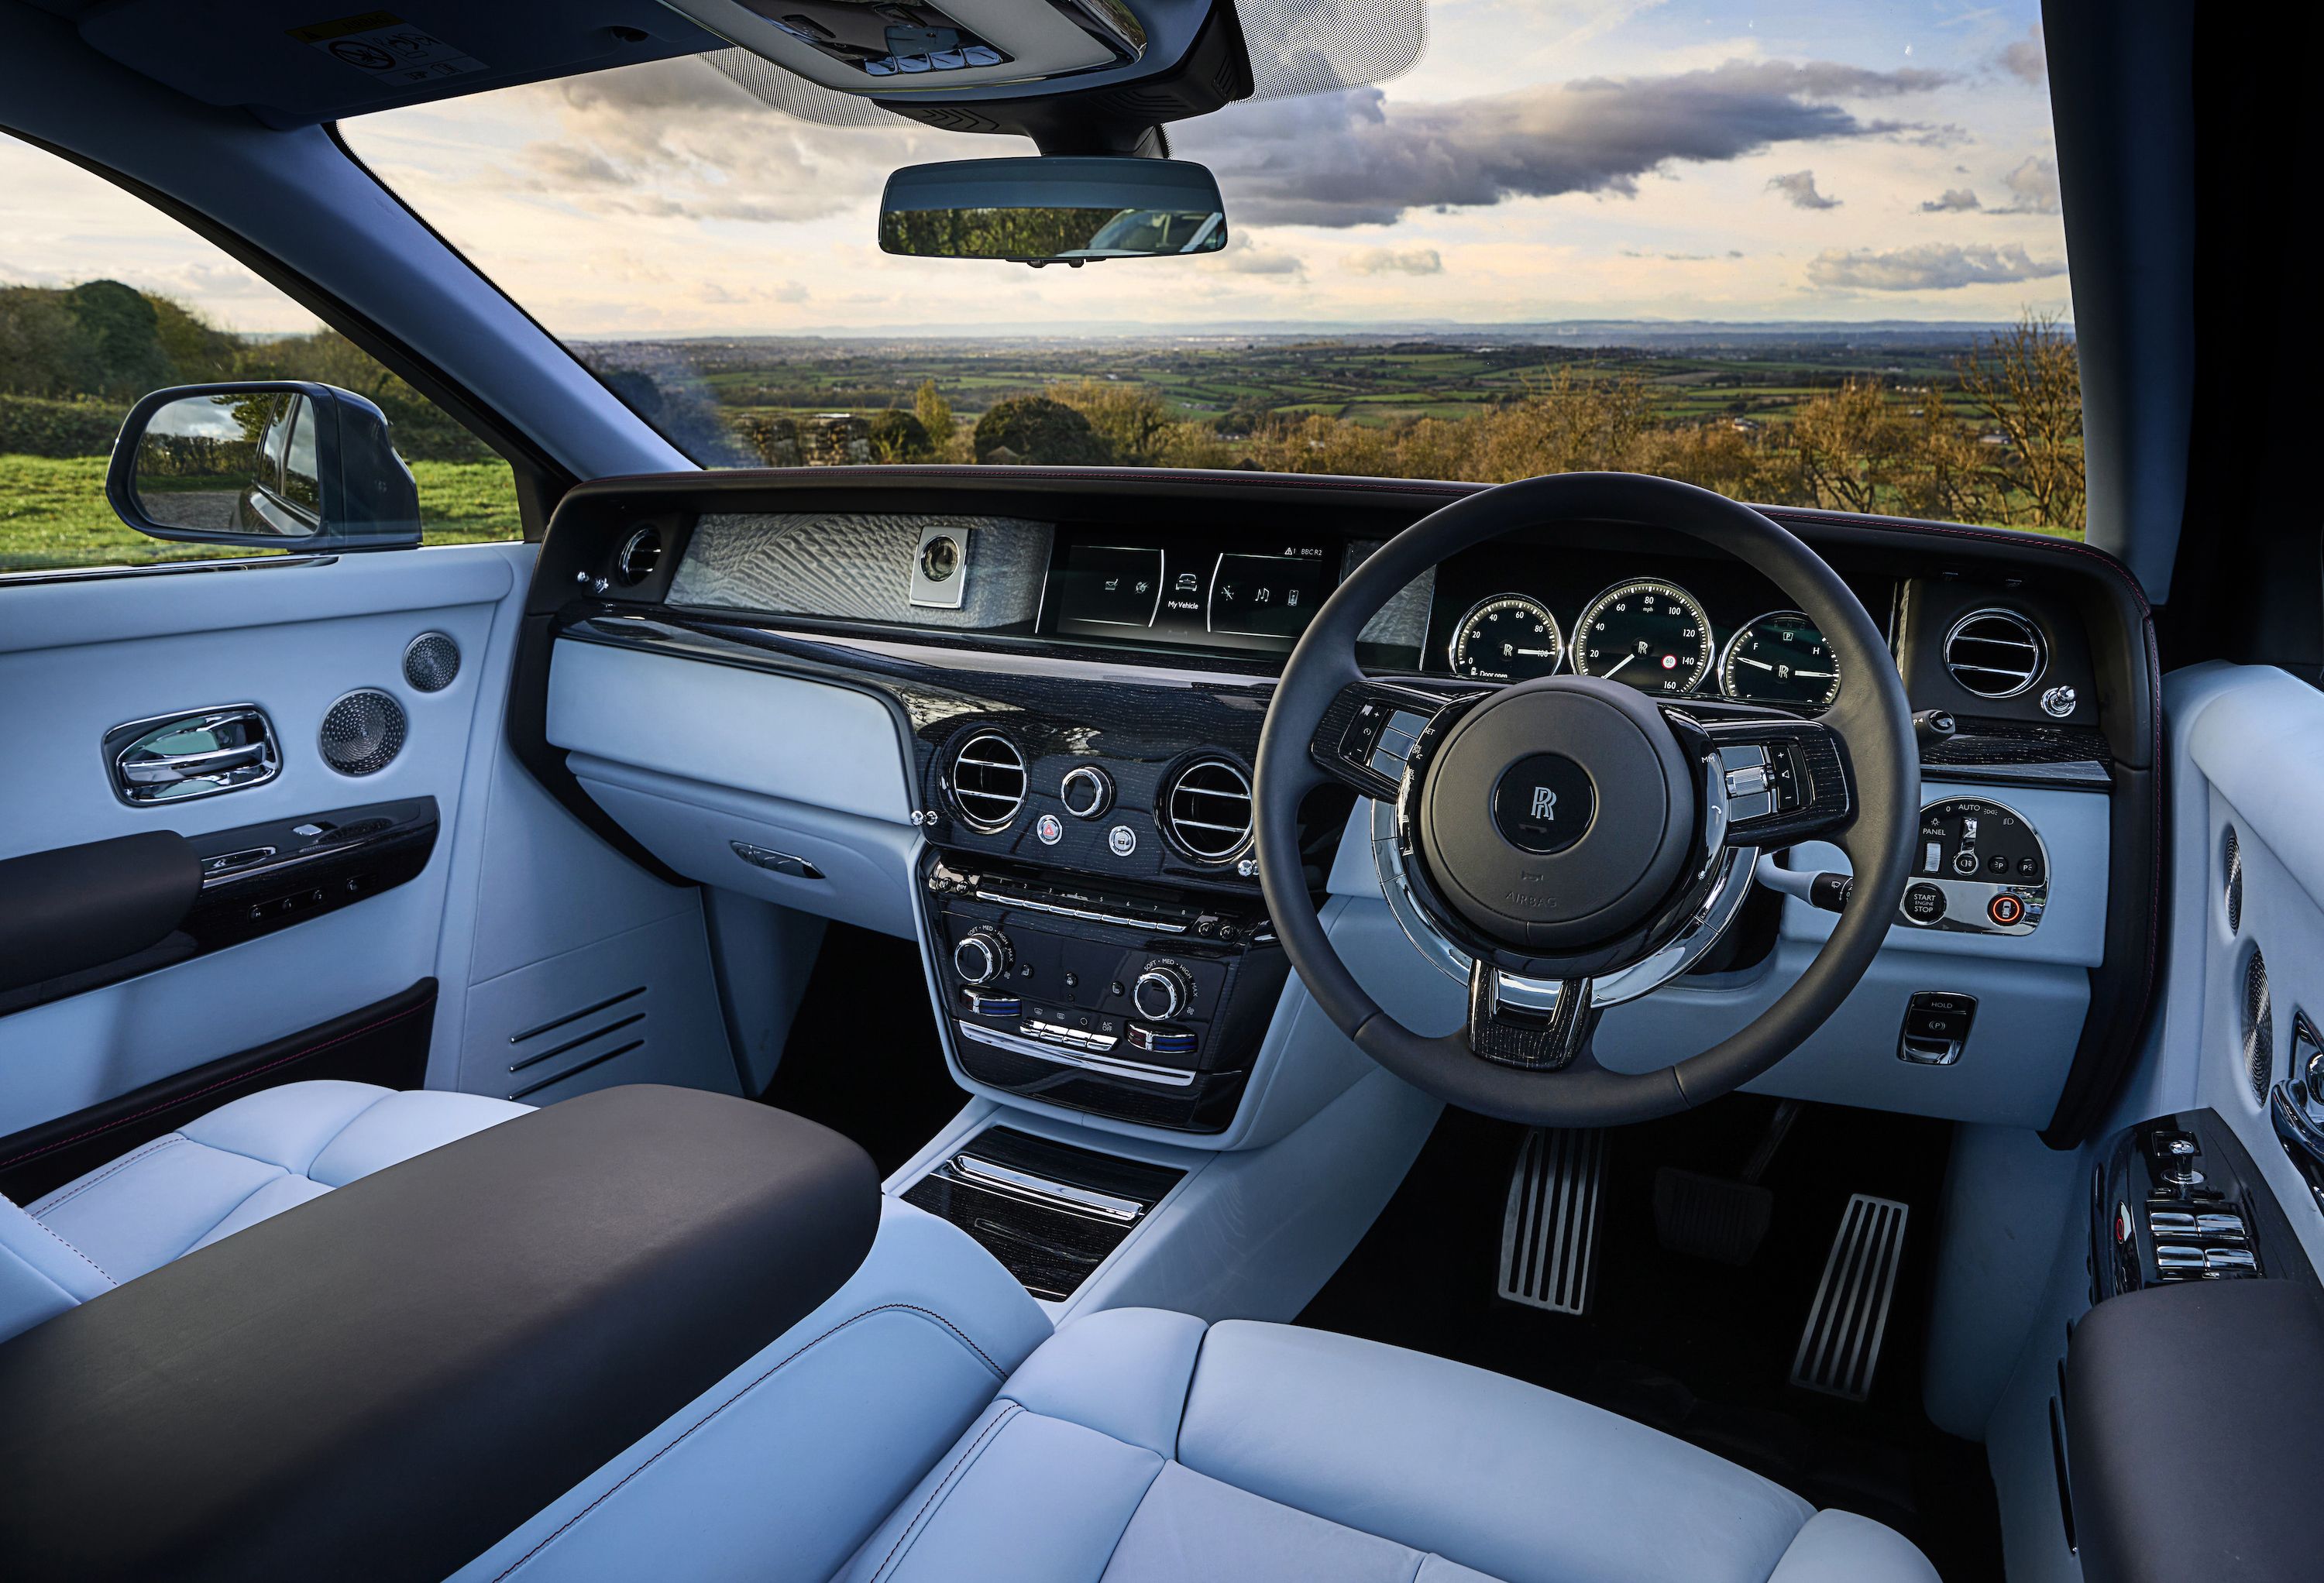 What are the special interior features of the Rolls Royce Phantom  Quora